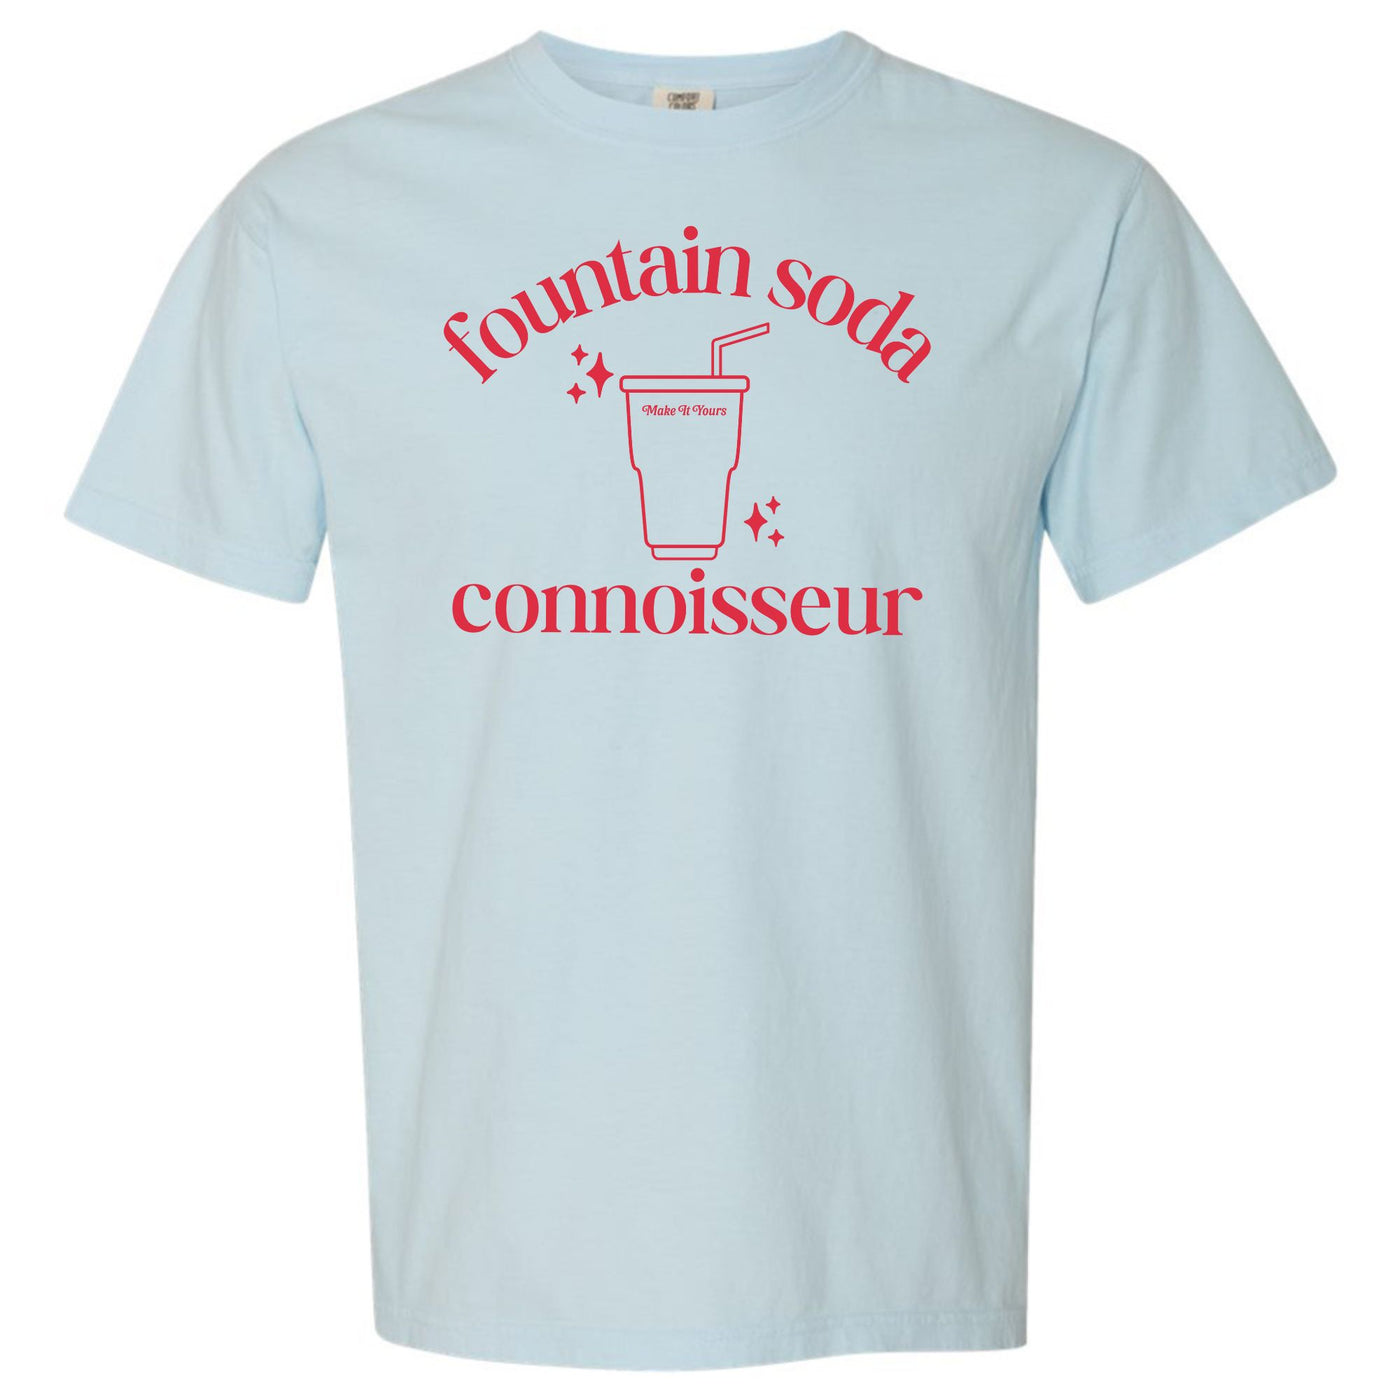 Make It Yours™ 'Fountain Soda Connoisseur' T-Shirt